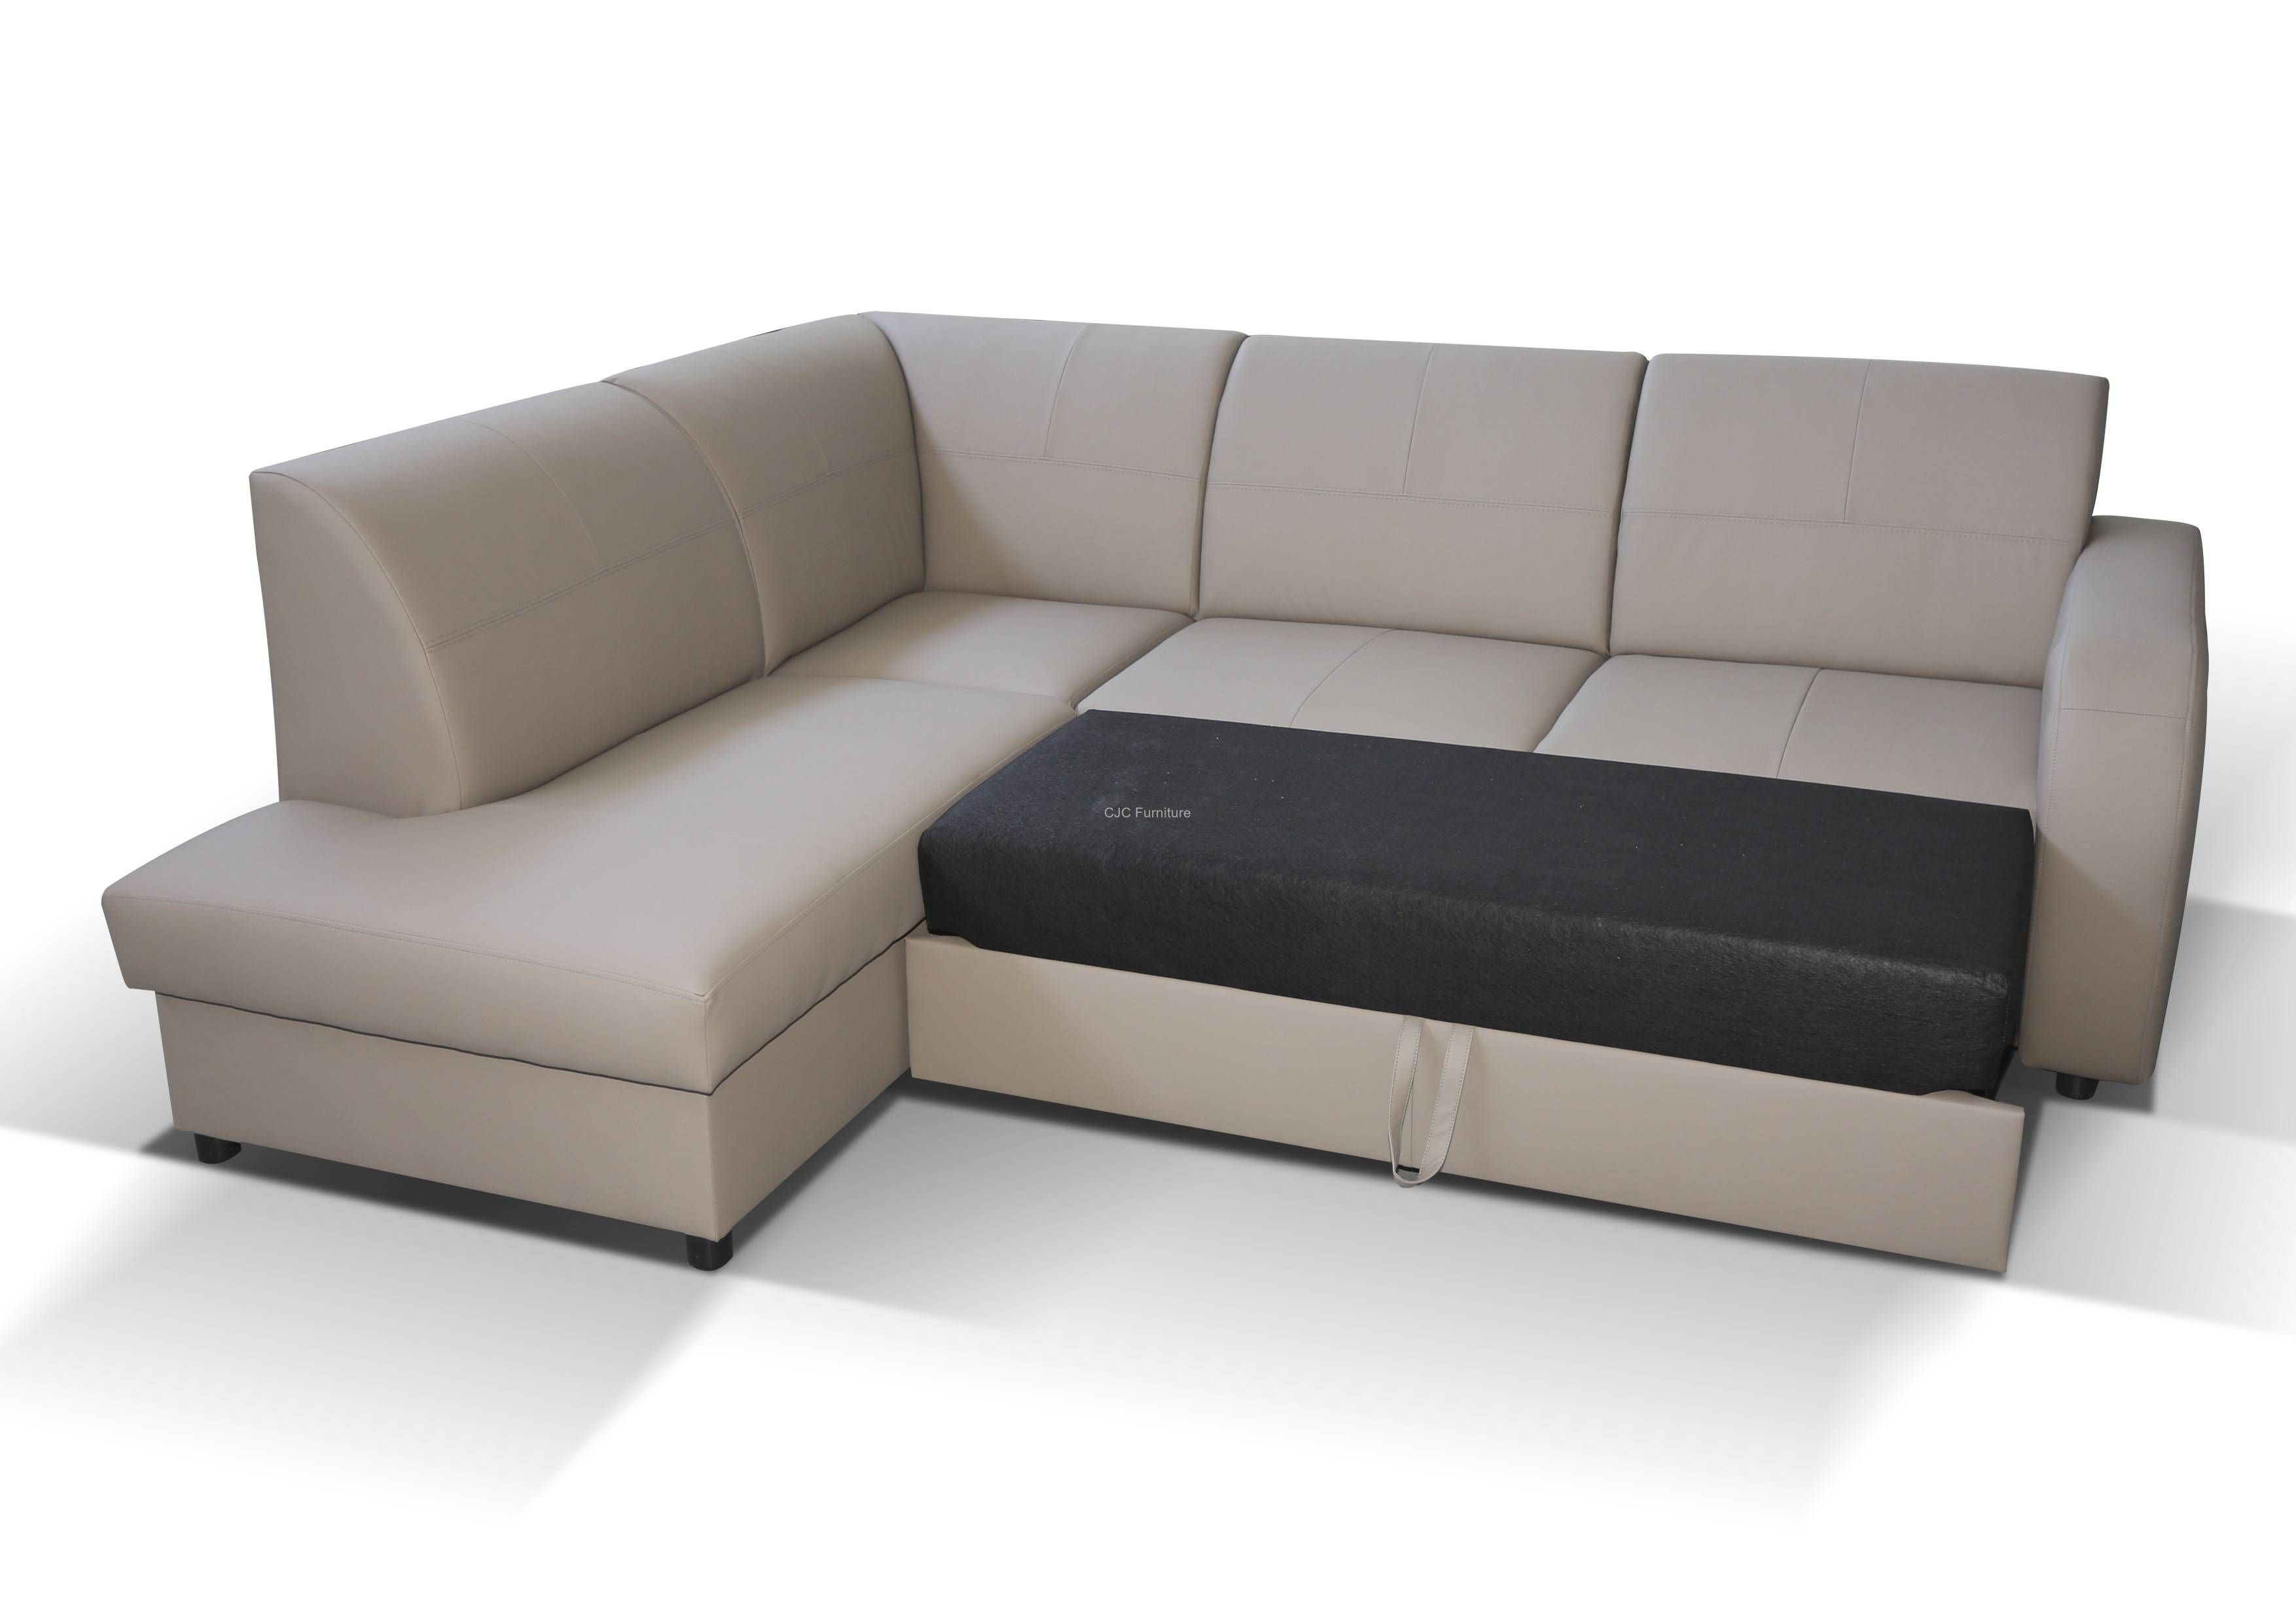 Sofas Center : Formidable Corner Sofa Picture Ideas Beds Uk Cheap Pertaining To Cheap Corner Sofa Bed (View 5 of 30)